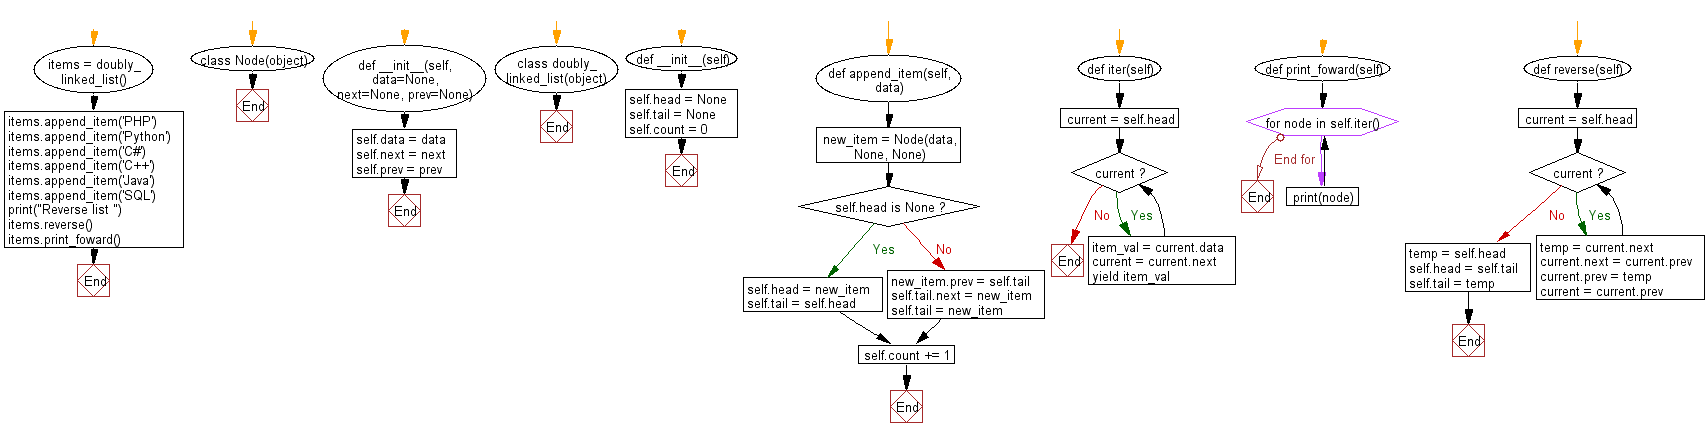 Flowchart: Print a given doubly linked list in reverse order.